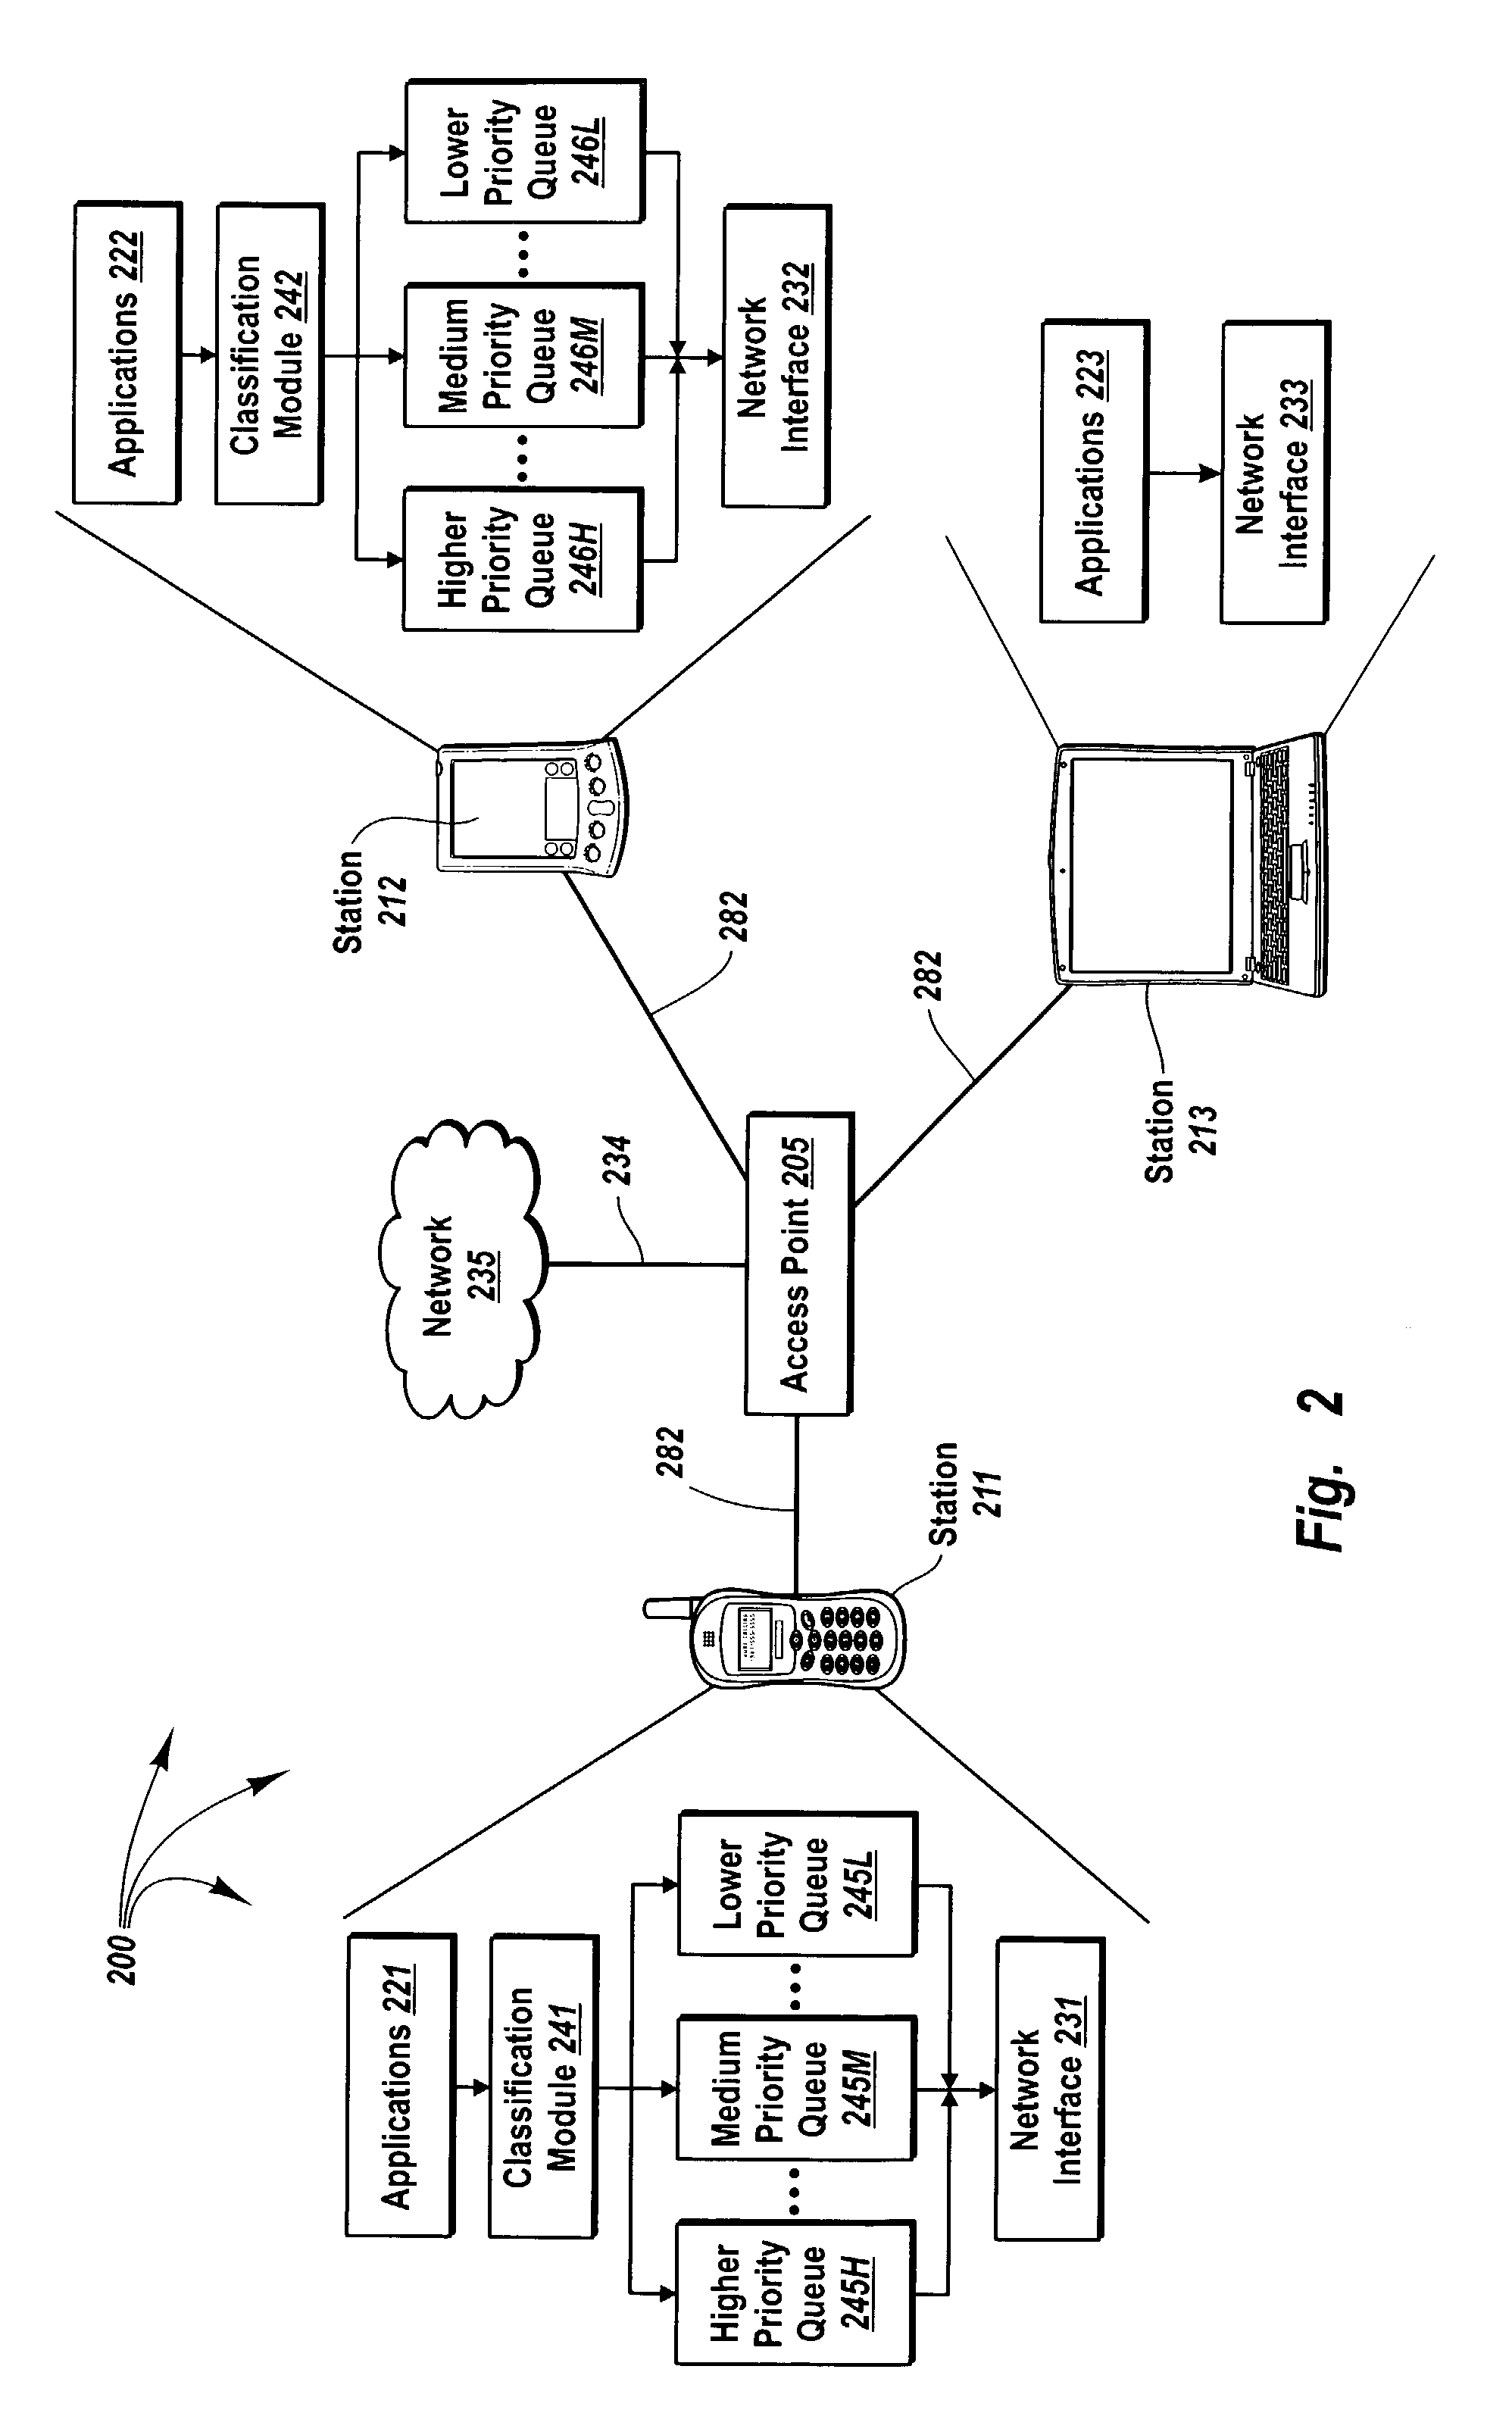 Providing contention free quality of service to time constrained data